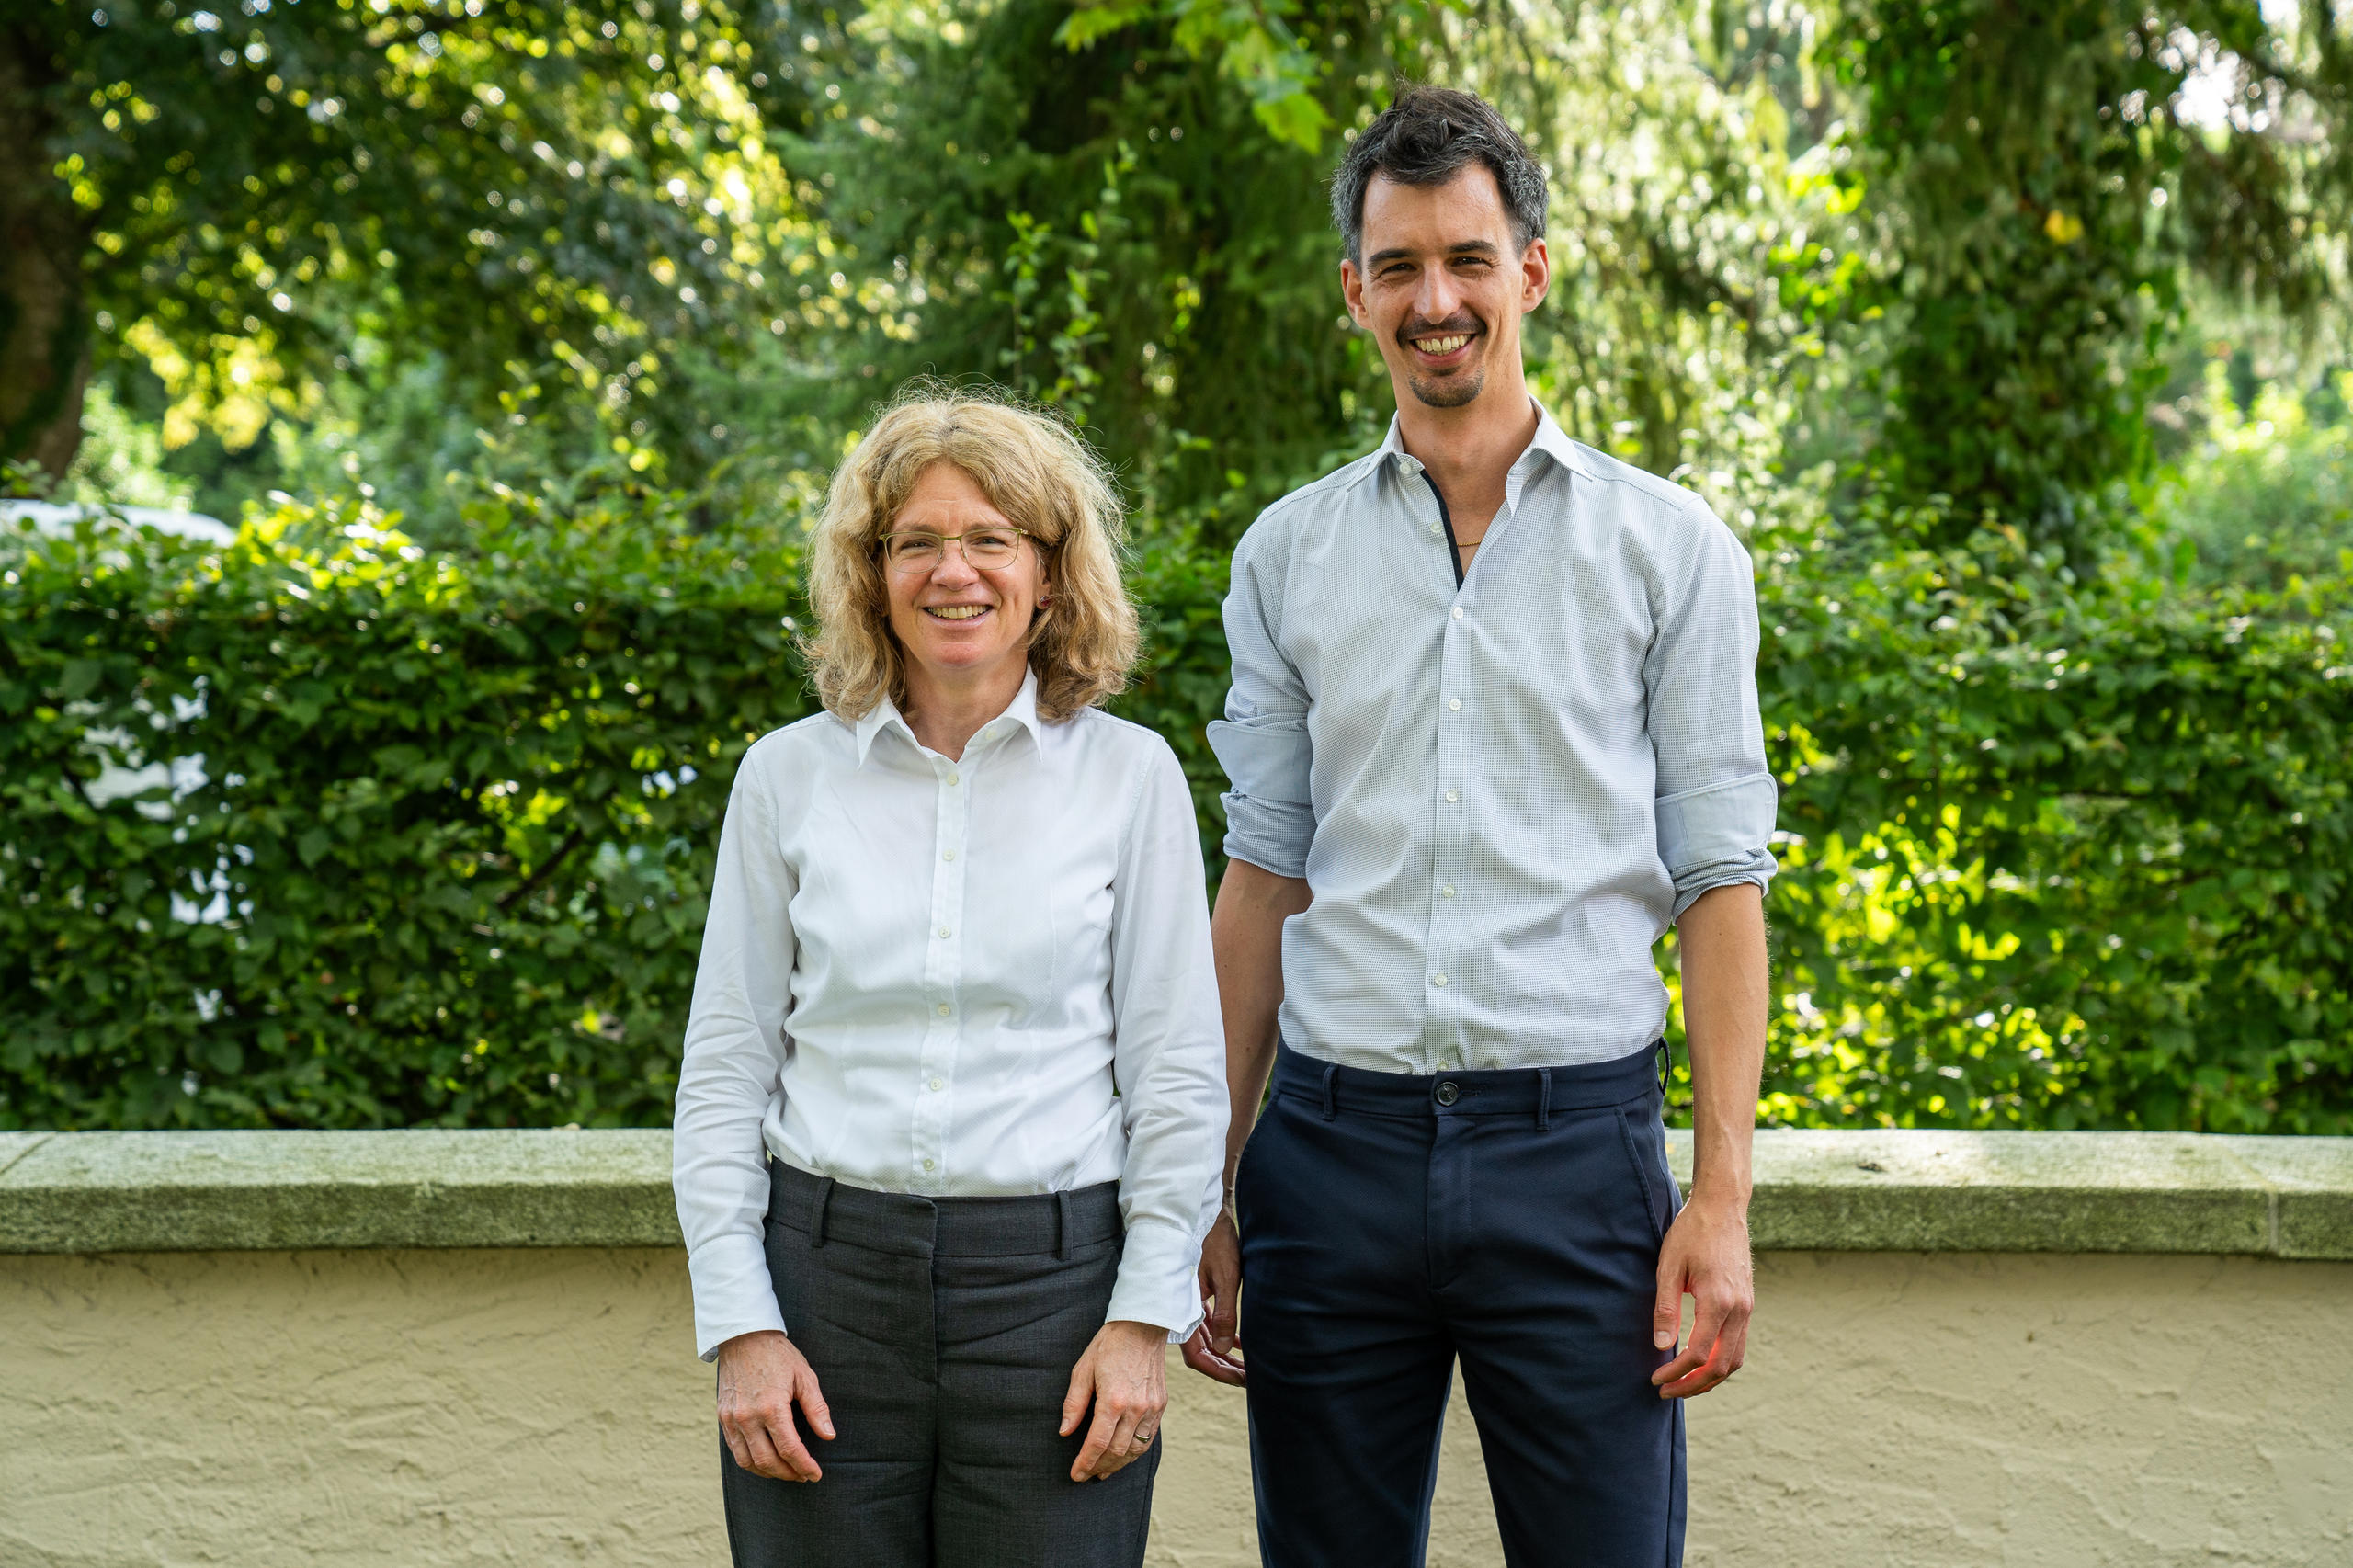 Stephanie Schmitt-Grohé and Fabio Canetg in business casual clothing outside